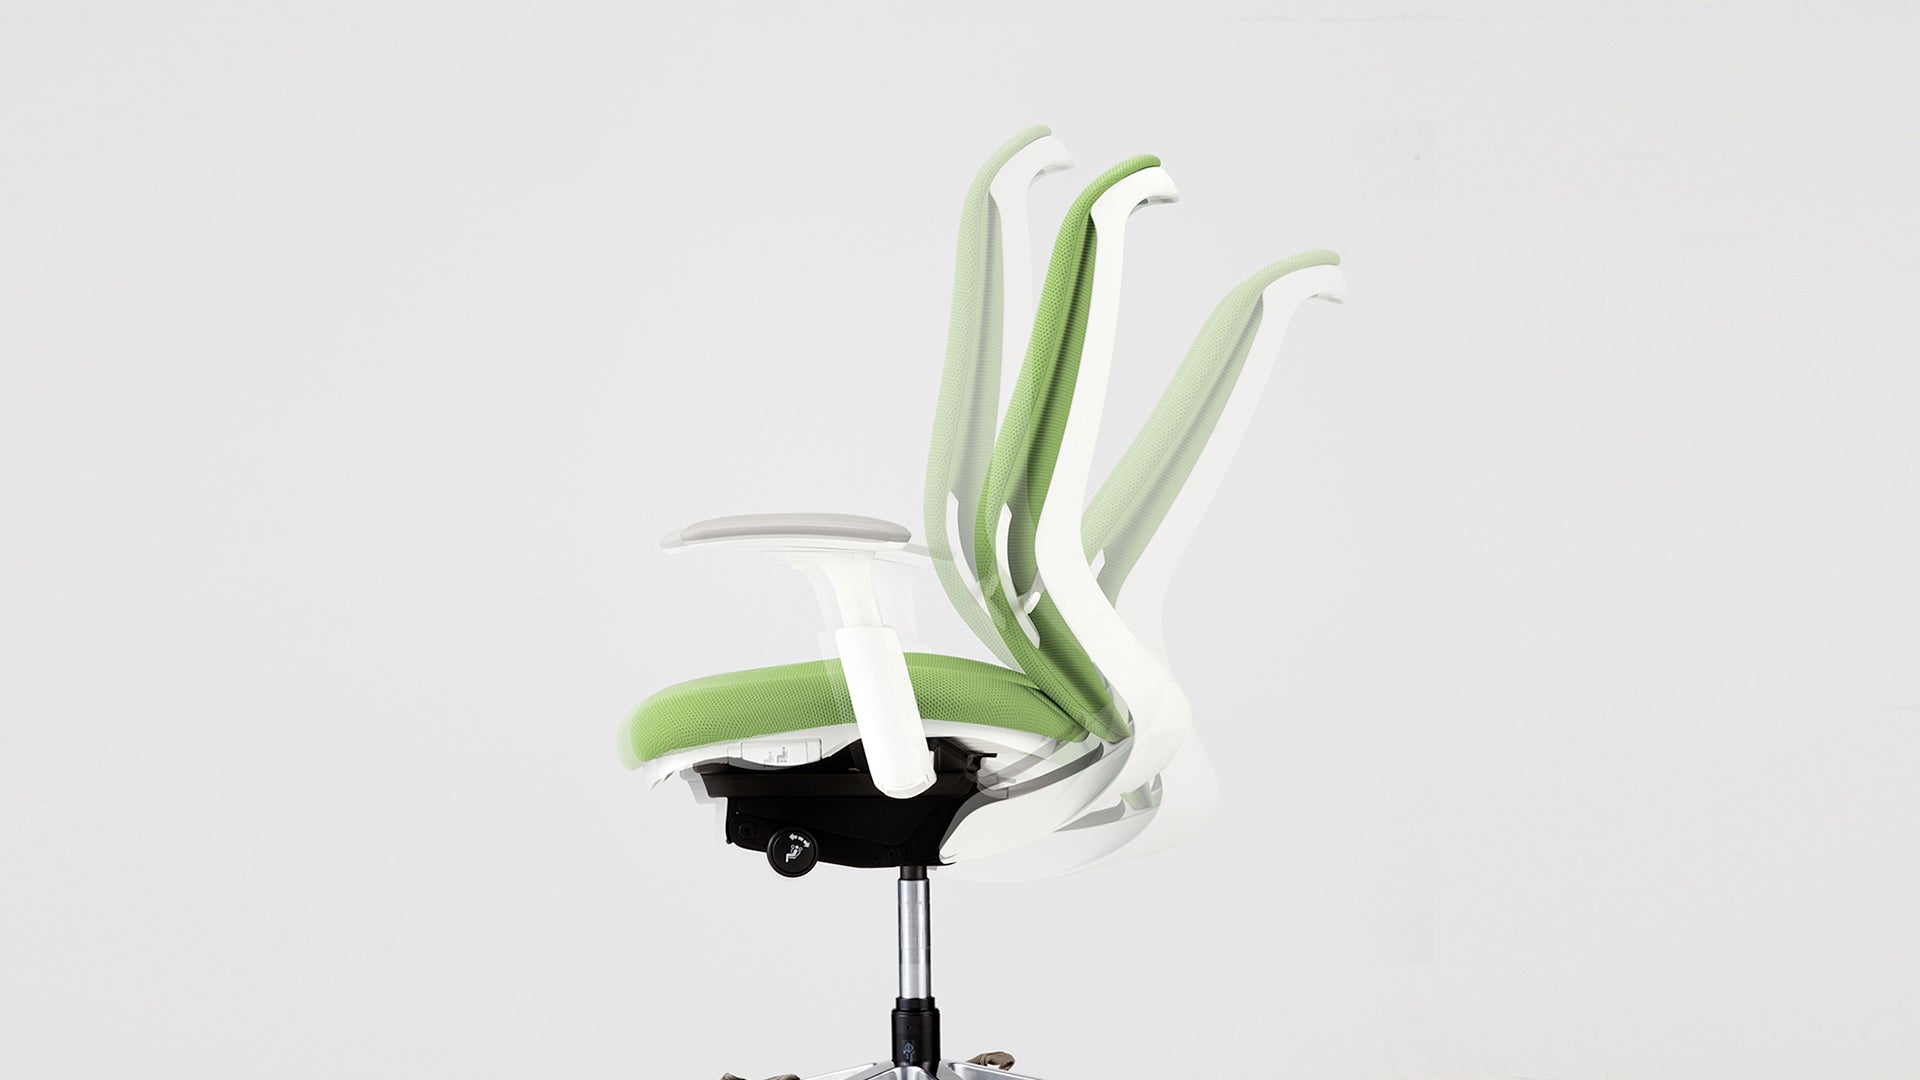 What is the significance of having an ergonomic chair equipped with a Forward Tilt Mechanism?